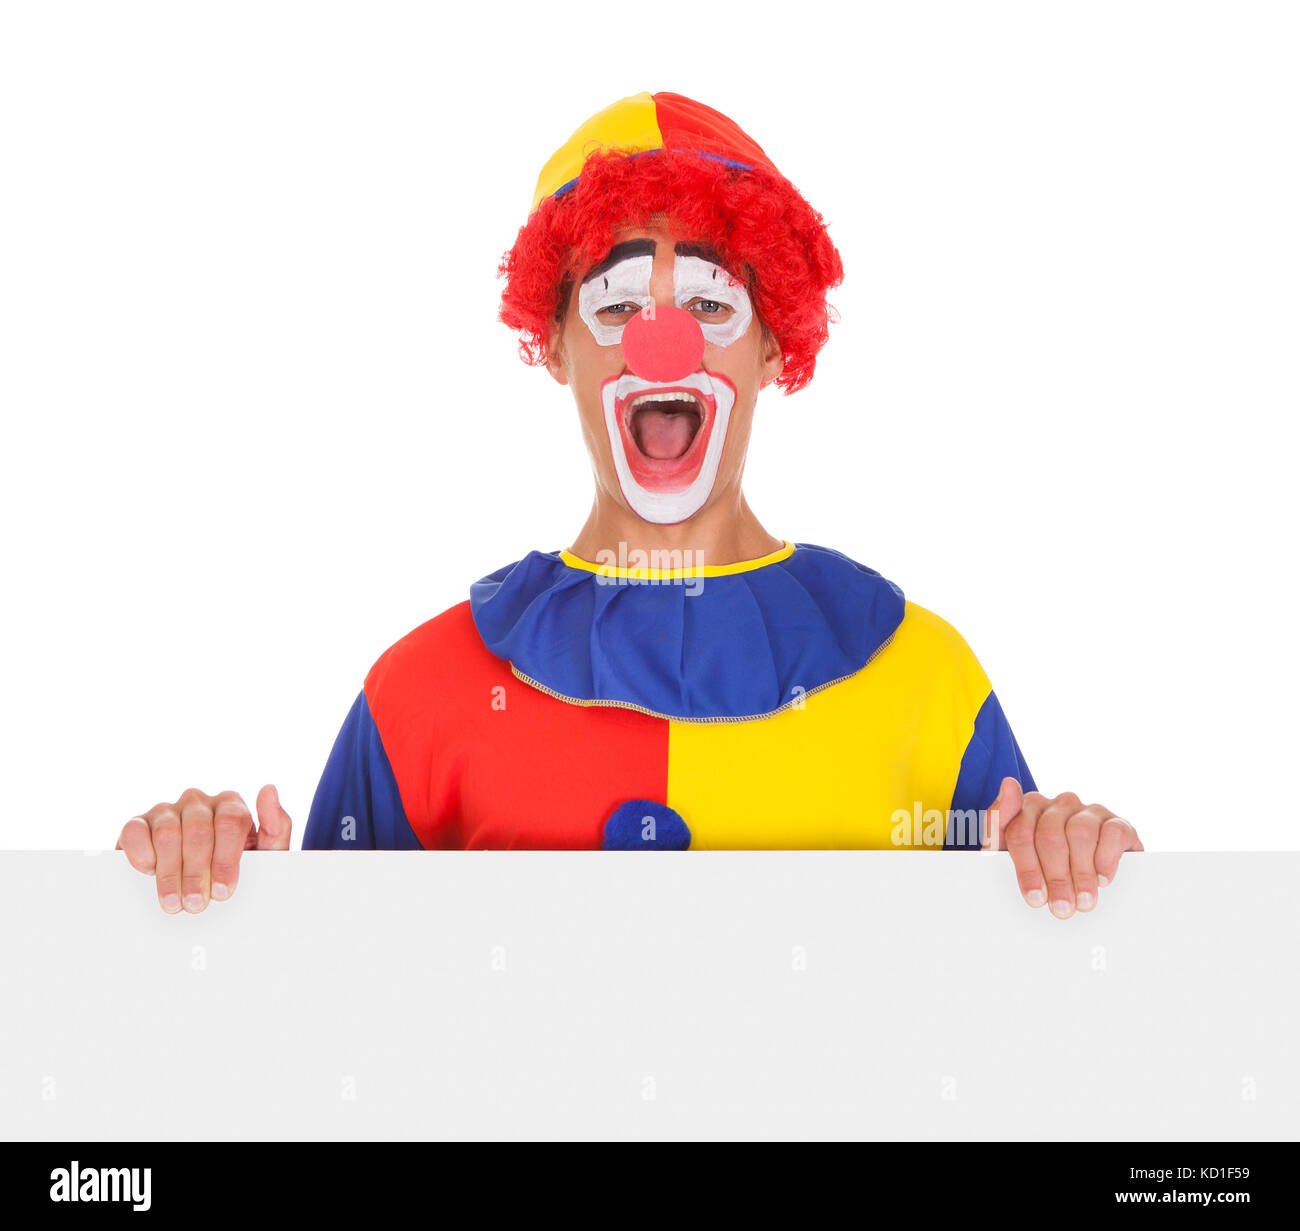 Portrait Of A Happy Joker Holding Blank Placard Over White Background Stock Photo